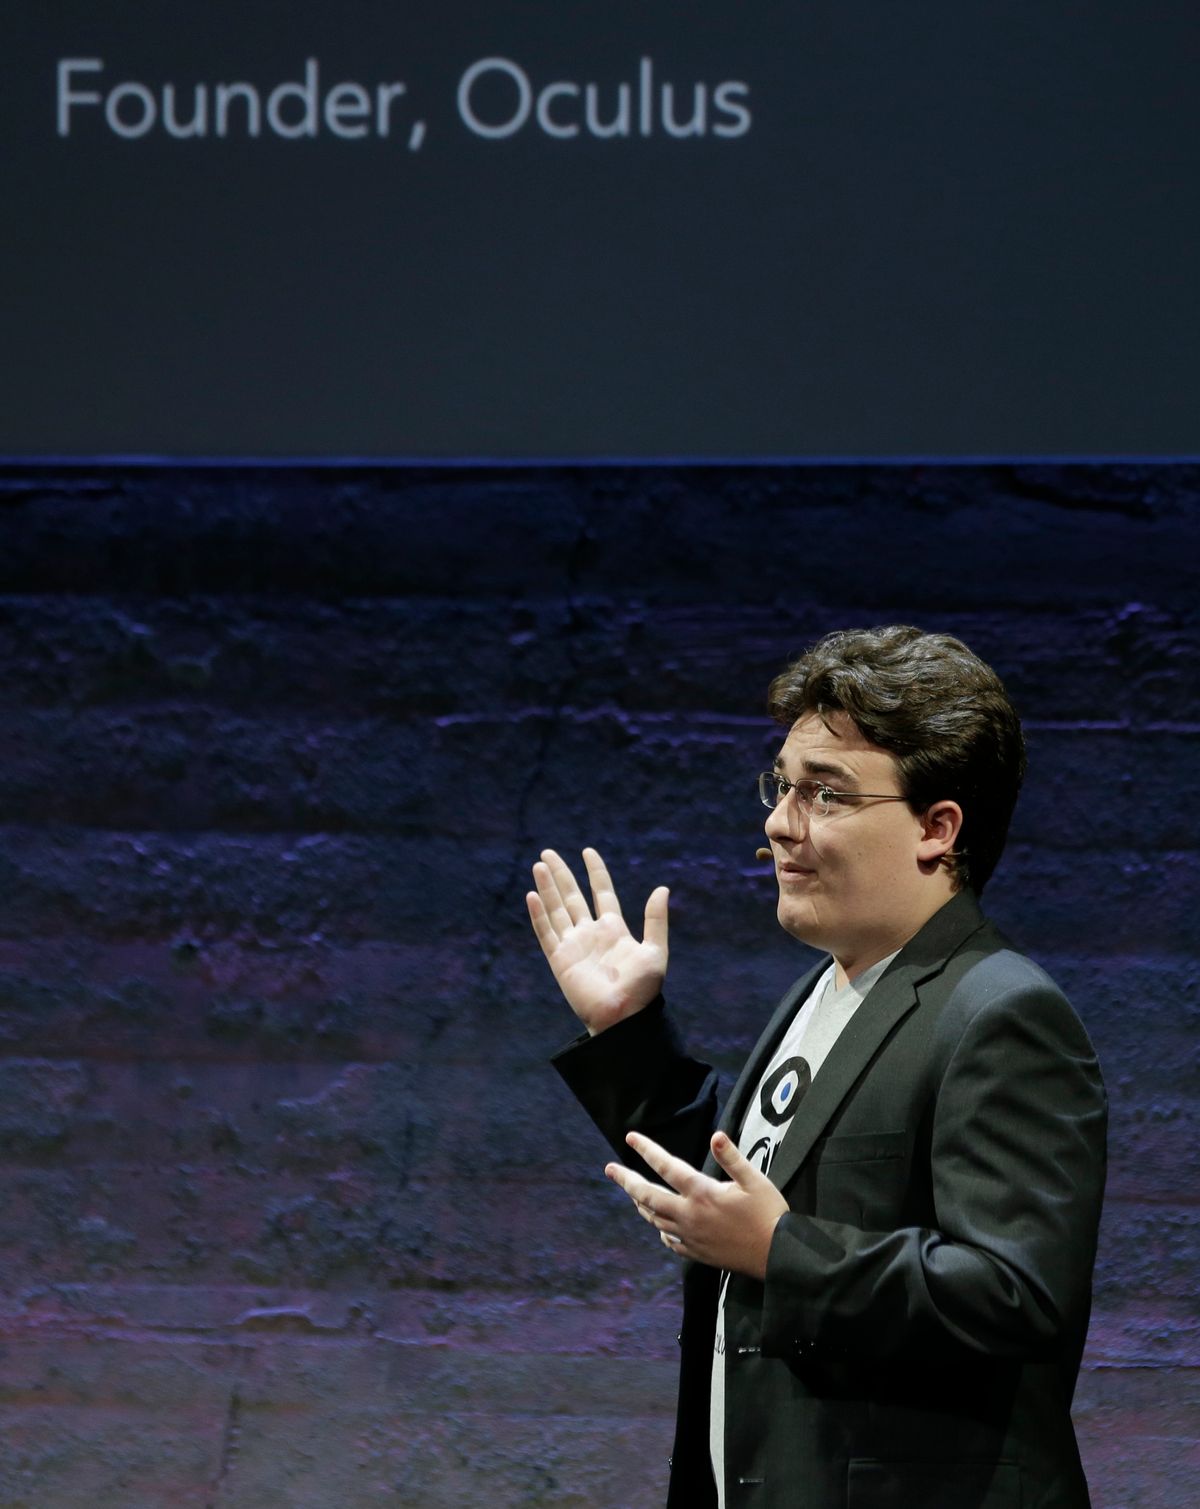 Oculus Founder Palmer Luckey talks about the Rift virtual-reality headset during a news conference Thursday, June 11, 2015, in San Francisco. Oculus is expanding its highly anticipated virtual-reality headset to simulate the sensation of touch and gesturing as part of its quest to blur the lines between the fake and genuine world. (AP Photo/Eric Risberg) (Associated Press)